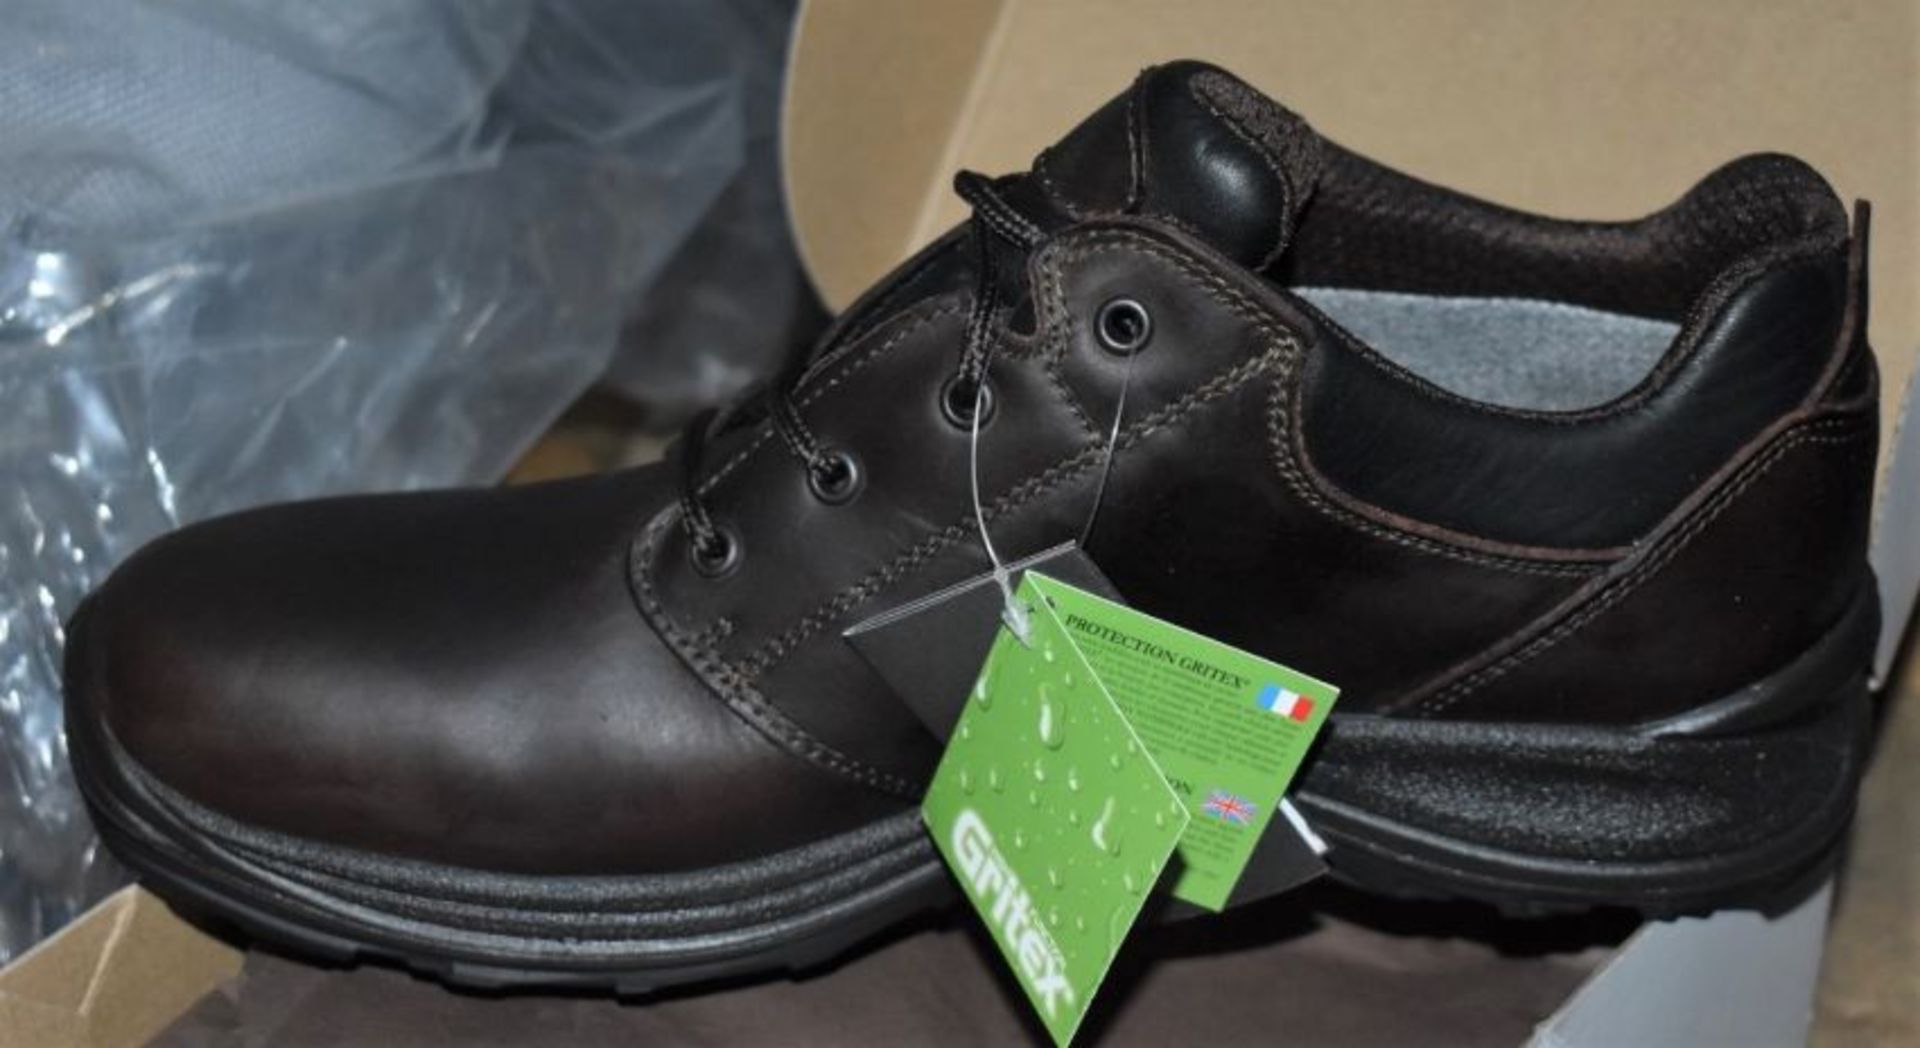 1 x Pair of Men's Grisport Brown Leather GriTex Shoes - Rogerson Footwear - Brand New and Boxed - - Image 5 of 6